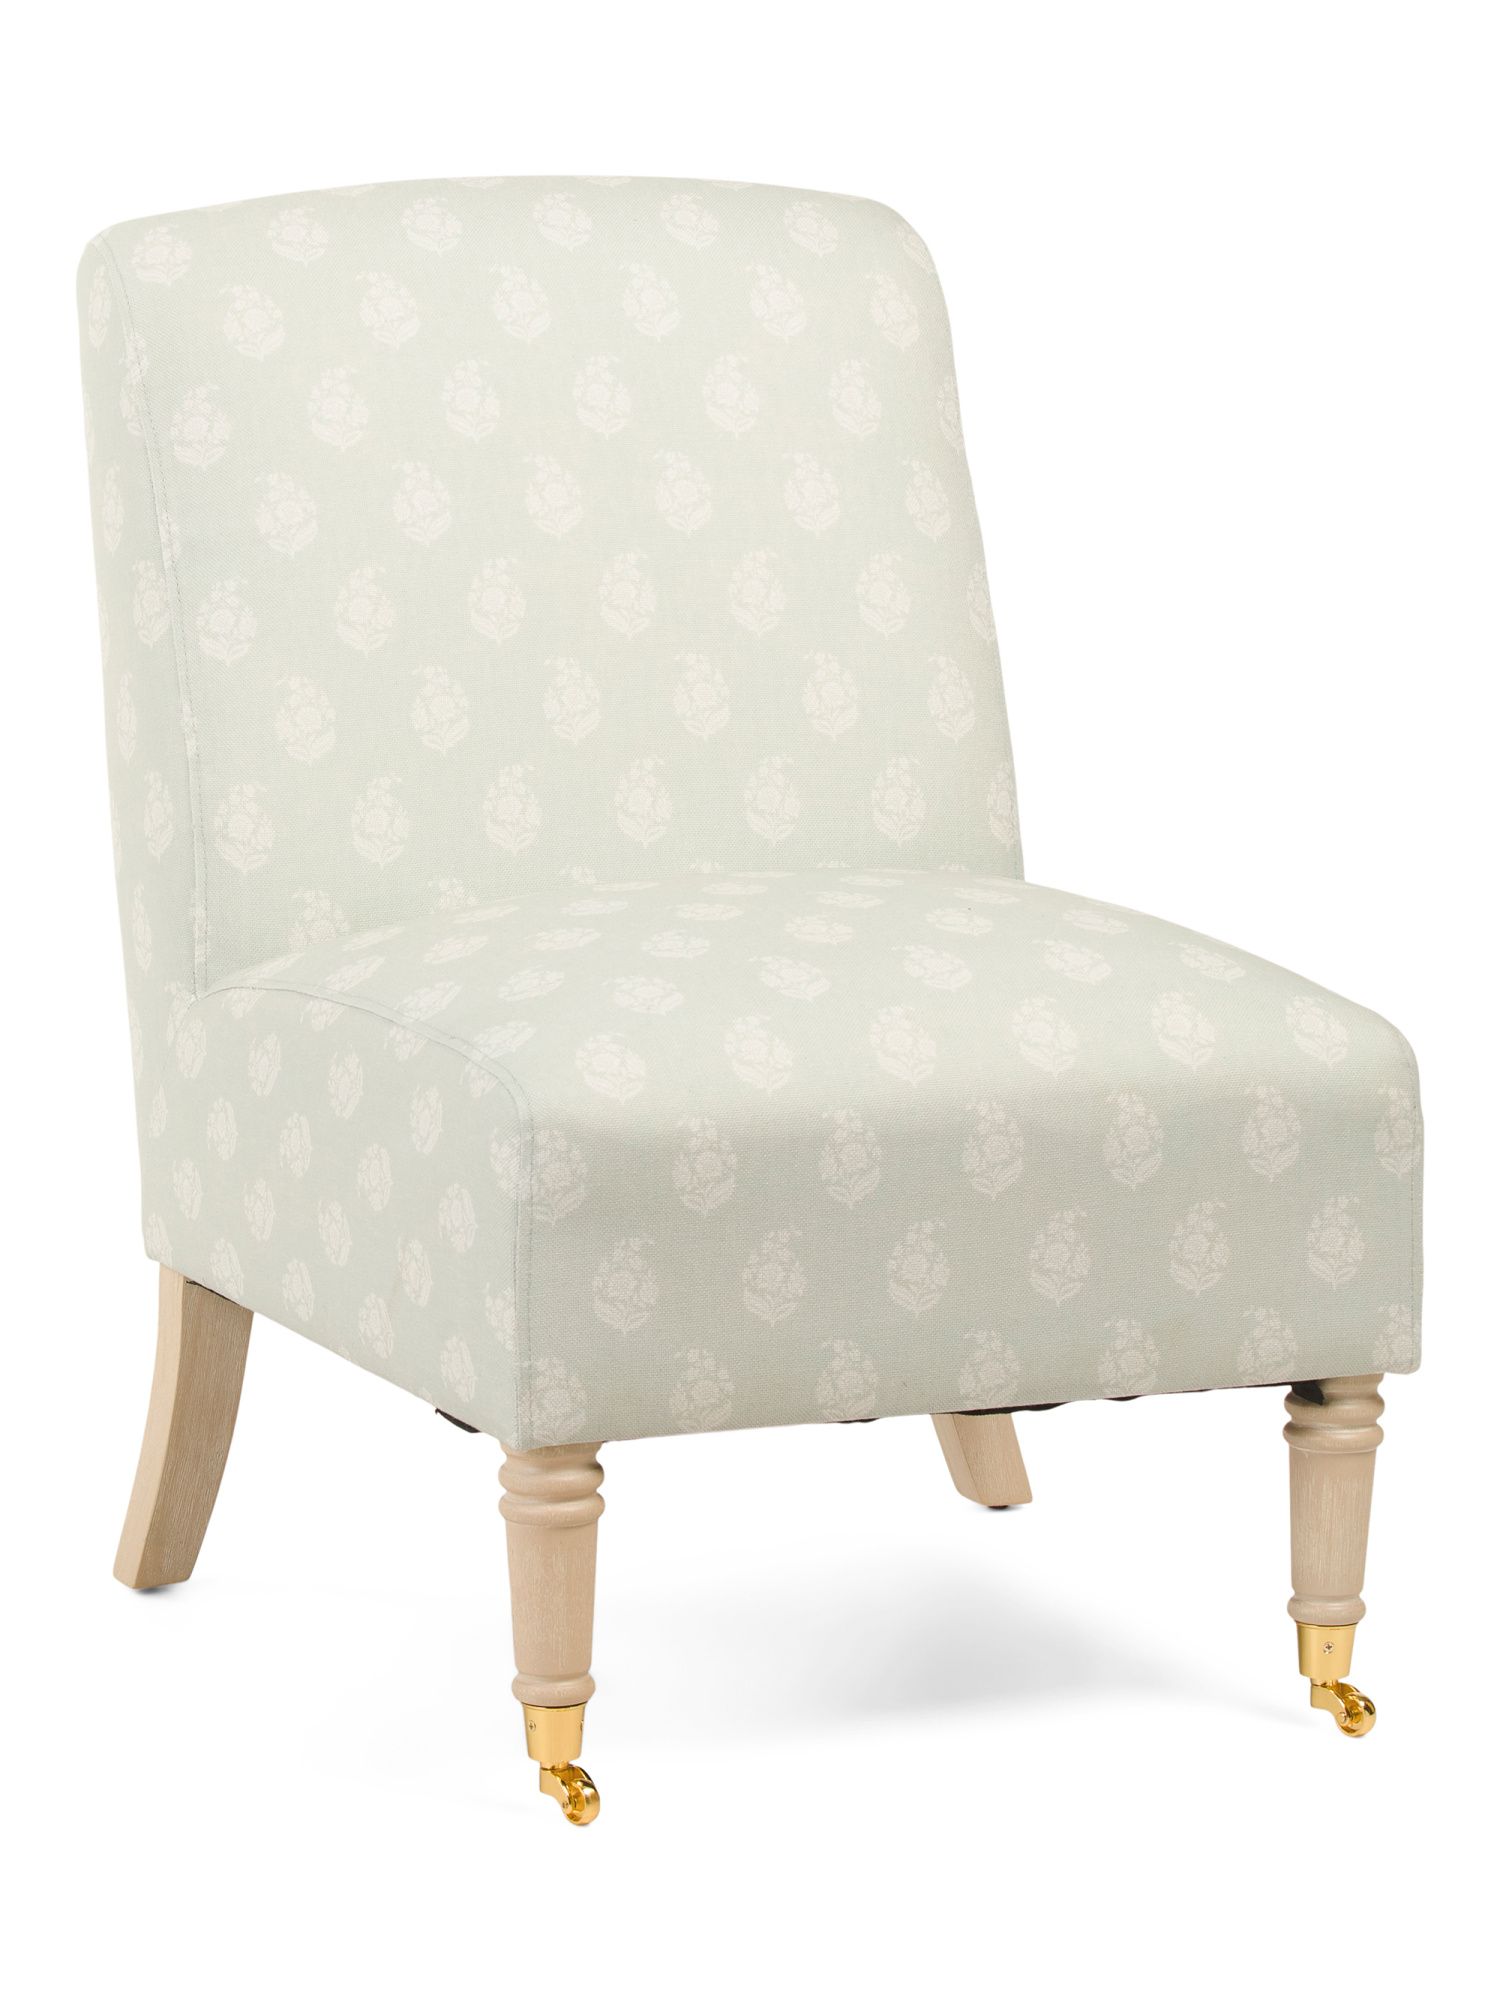 Printed Accent Chair On Castor Feet | Marshalls